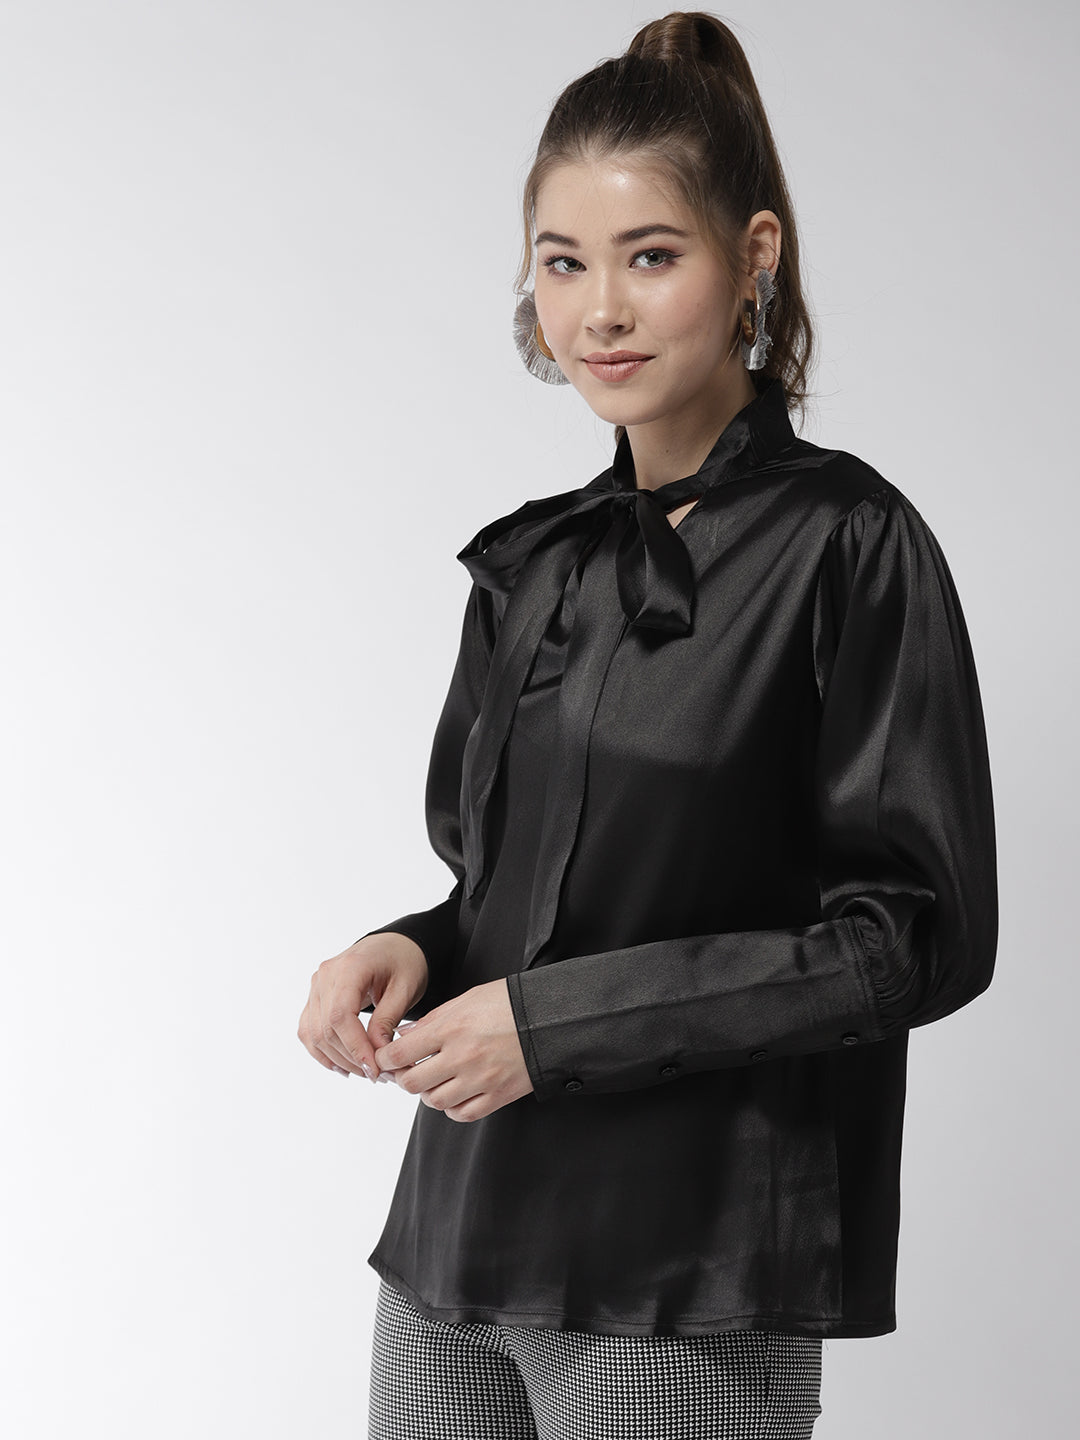 Women's Black Shirt with Long Cuff and attached Necktie